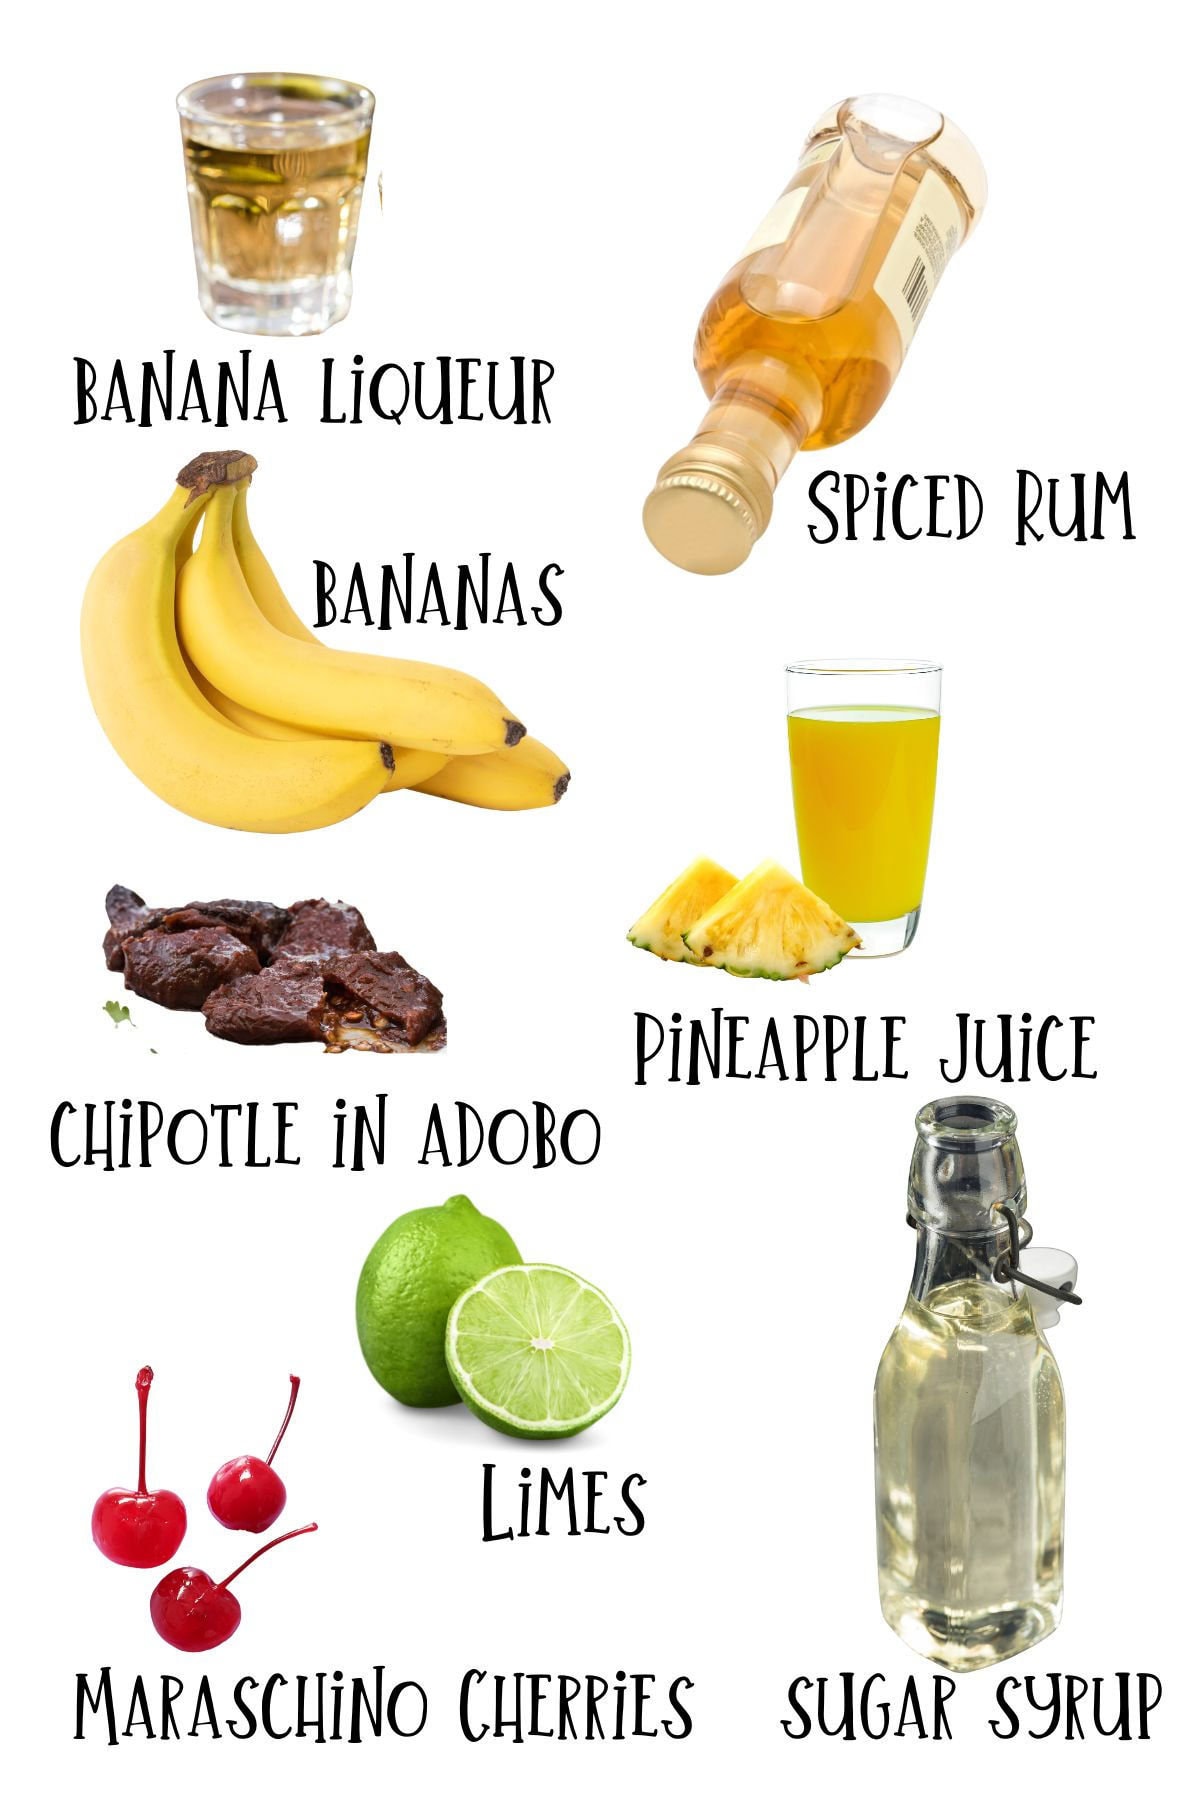 Labeled ingredients for banana daiquiris.